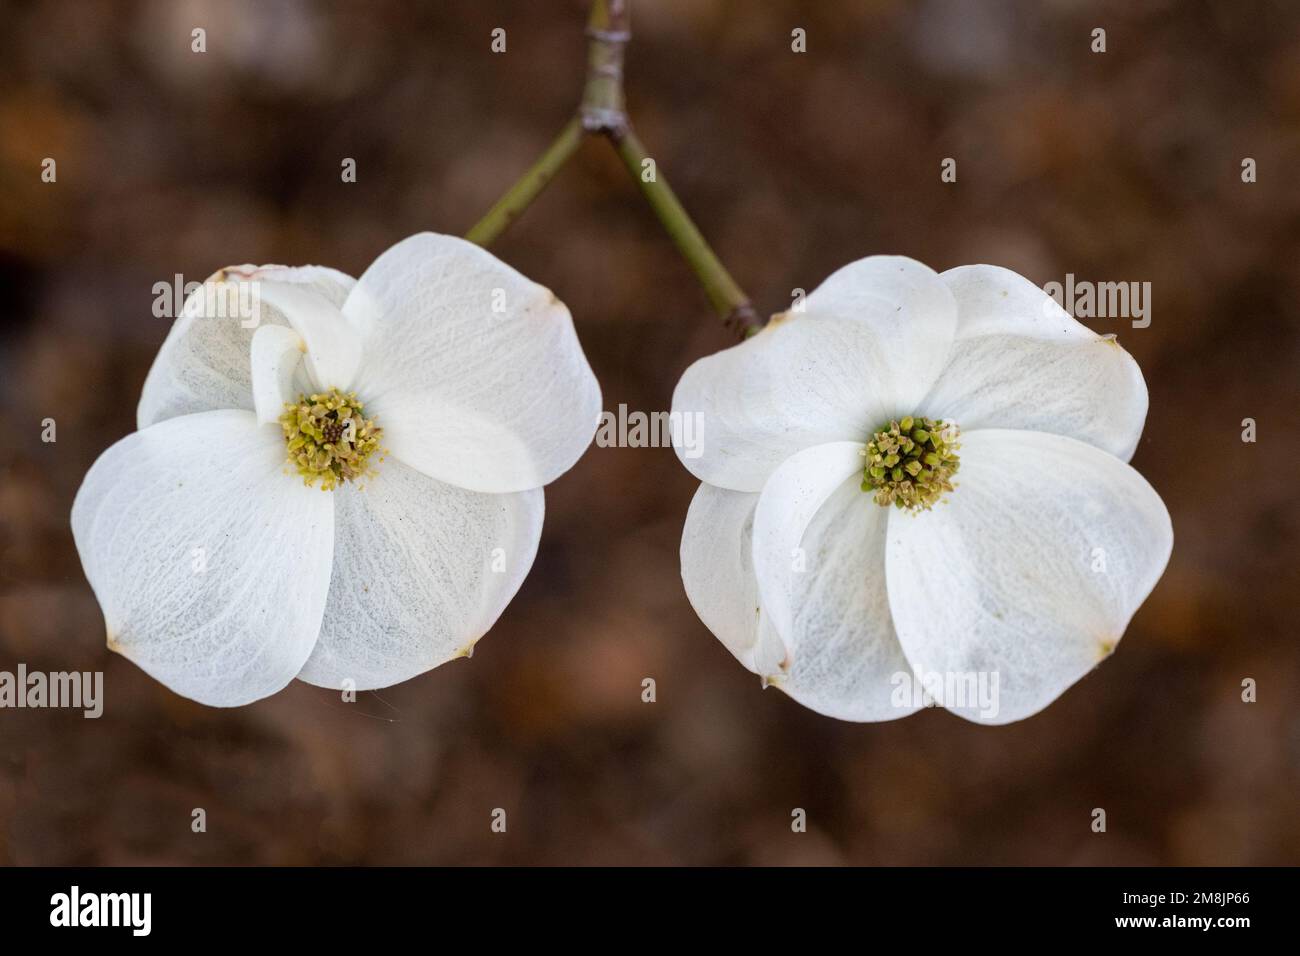 Two white dogwood flowers (genus Cornus) against brown backgound with  yellow and green center, viewed from above, on a forked twig- spring concept Stock Photo